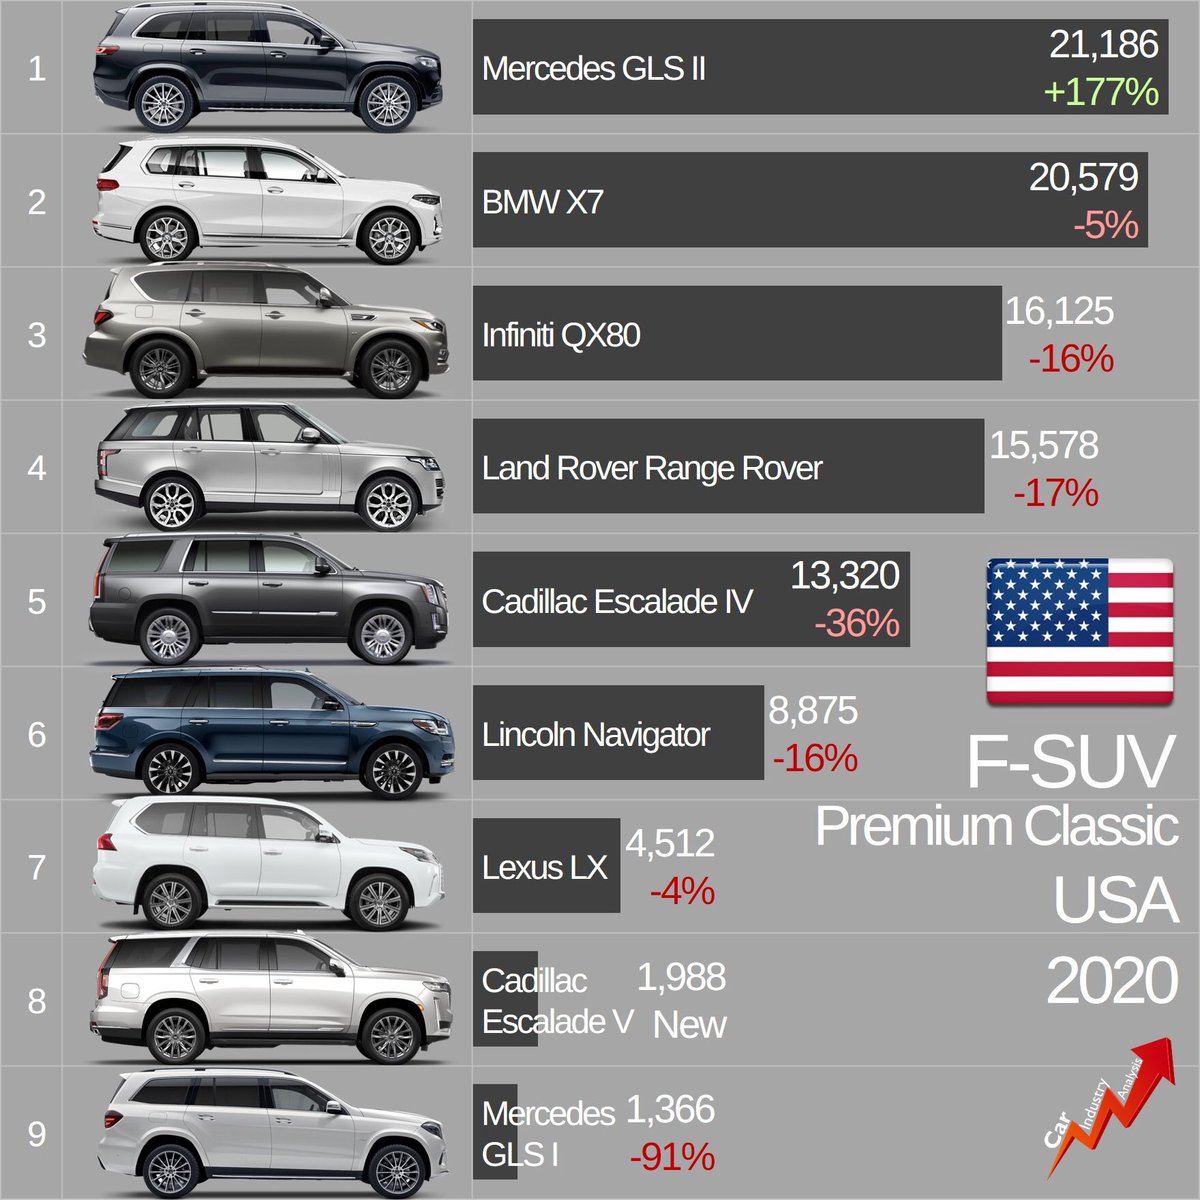 2020 results: the new #MercedesGLS overtook the #BMWX7 and became America’s top selling luxury SUV. Sales of the premium classic F-SUV totaled 103,600 units, down 12%. Jeep should join the segment with the upcoming #JeepWagoneer 

#carindustryanalysis #felipemunoz #carsales